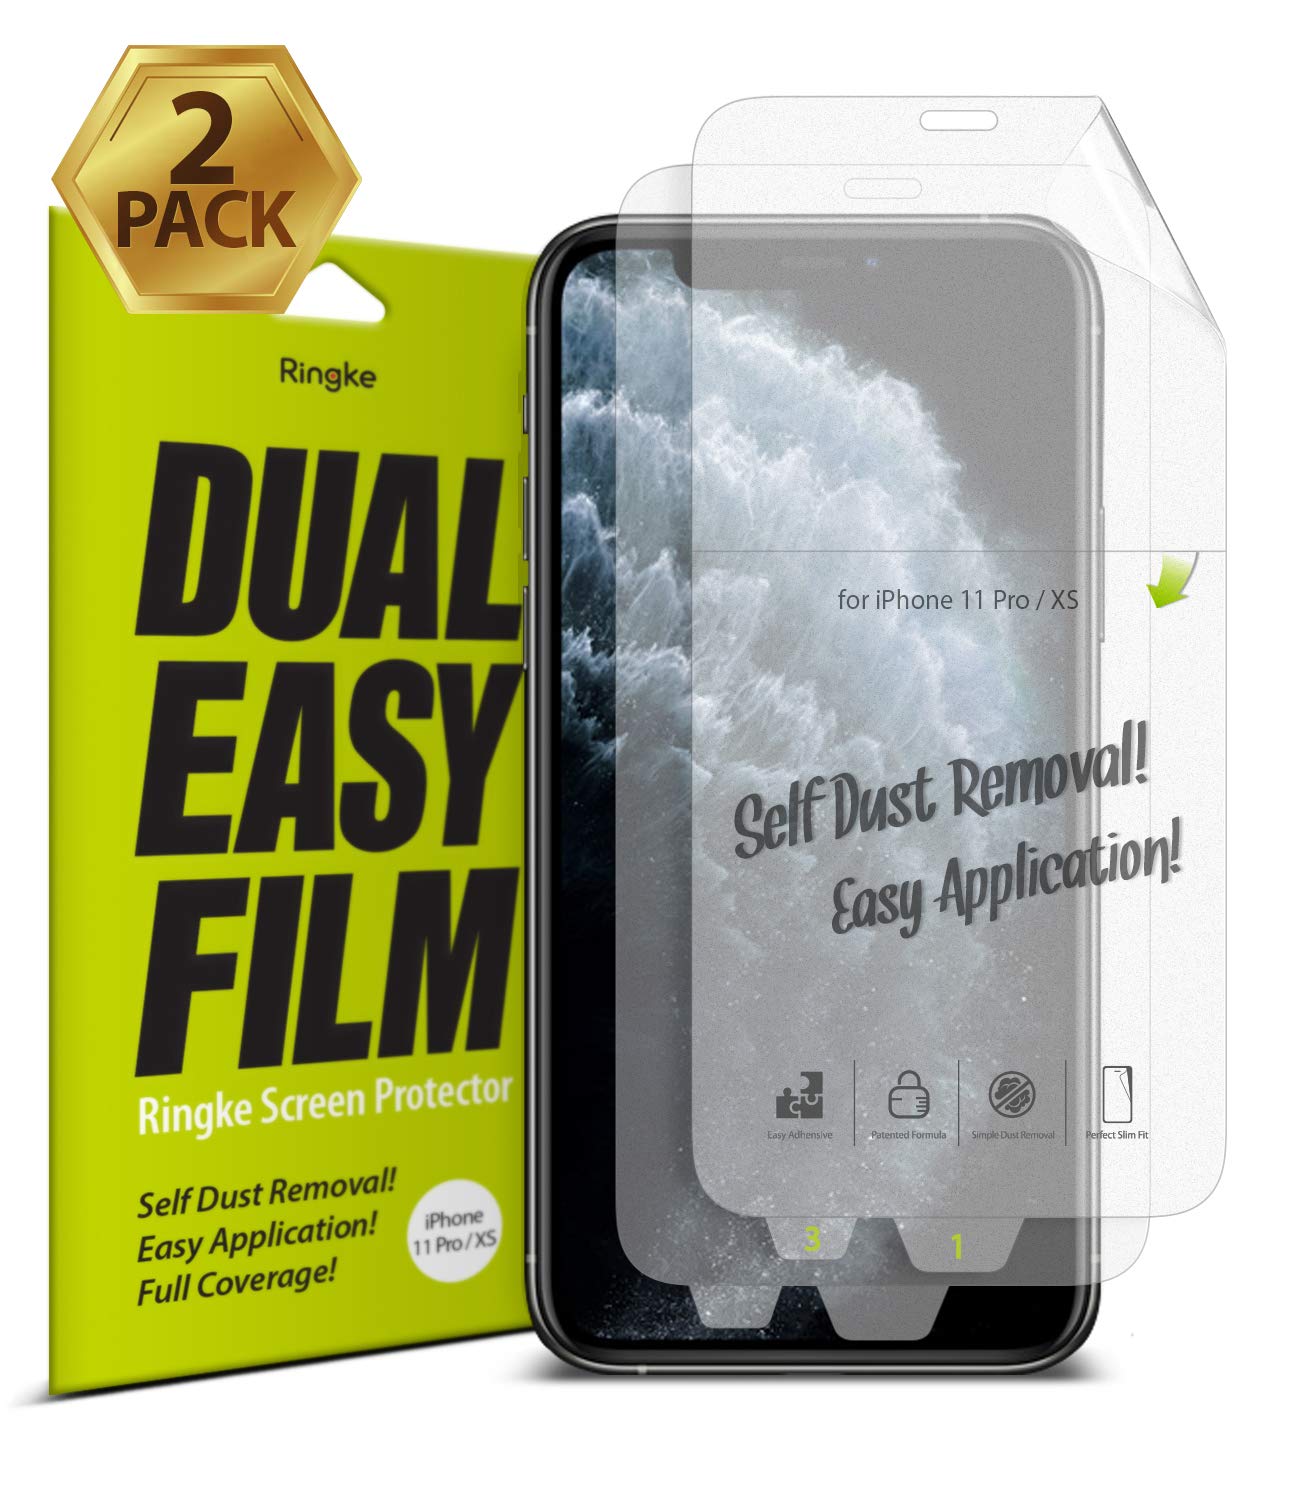 iPhone 11 Pro Screen Protector Dual Easy Film 2 Pack